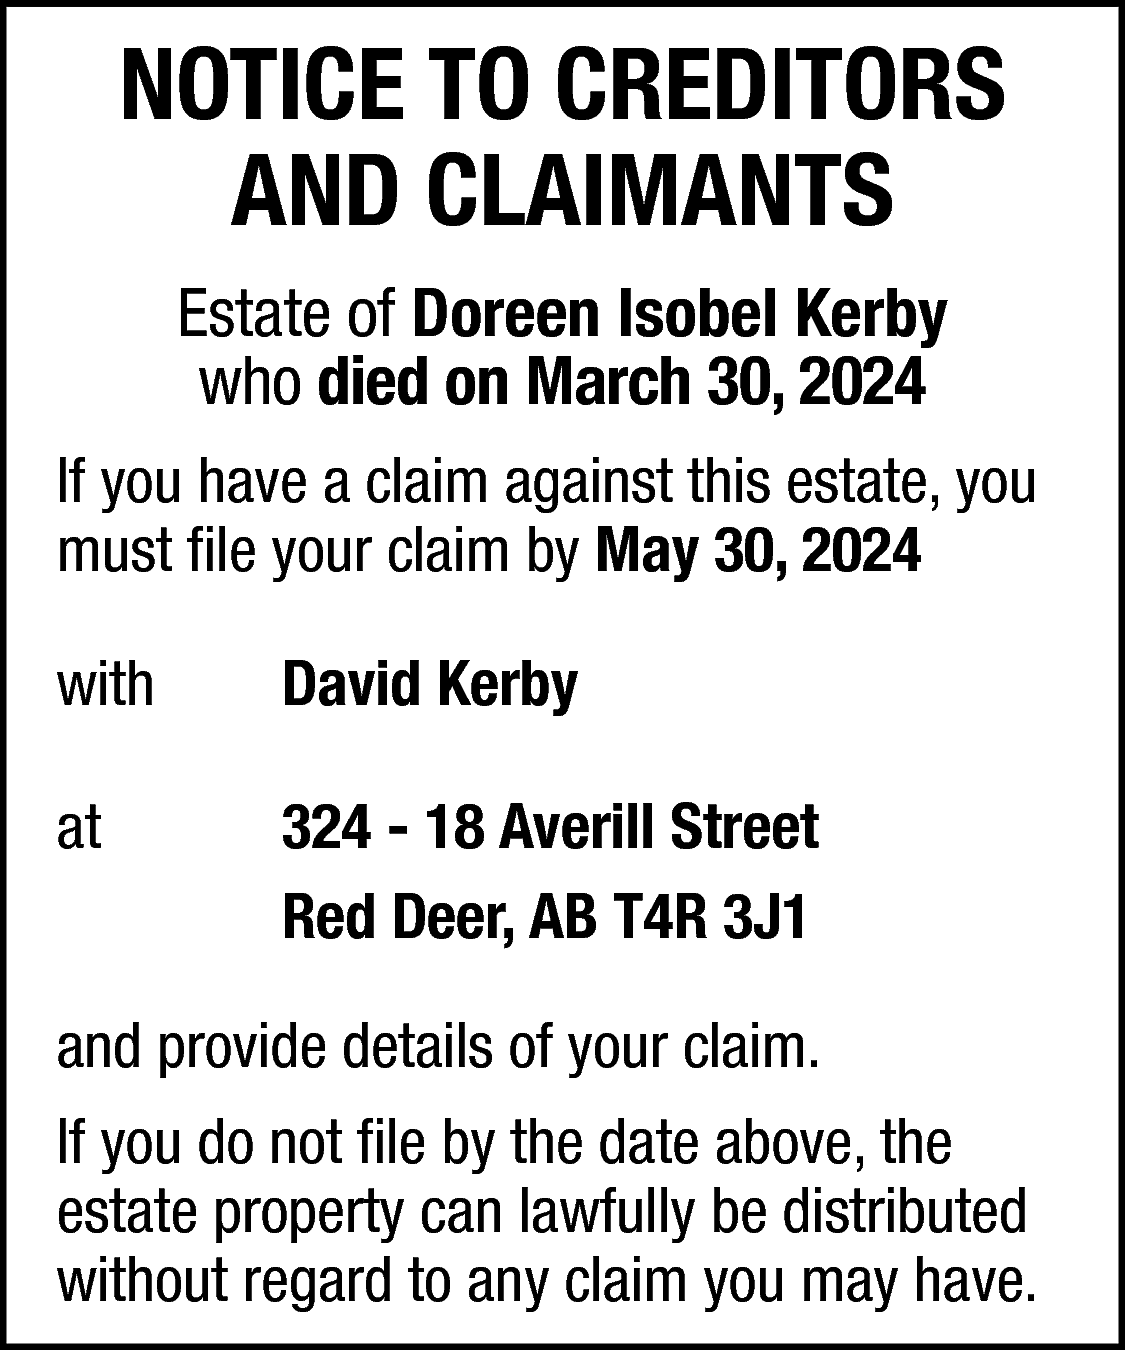 NOTICE TO CREDITORS <br>AND CLAIMANTS  NOTICE TO CREDITORS  AND CLAIMANTS  Estate of Doreen Isobel Kerby  who died on March 30, 2024  If you have a claim against this estate, you  must file your claim by May 30, 2024  with    David Kerby    at    324 - 18 Averill Street  Red Deer, AB T4R 3J1    and provide details of your claim.  If you do not file by the date above, the  estate property can lawfully be distributed  without regard to any claim you may have.    